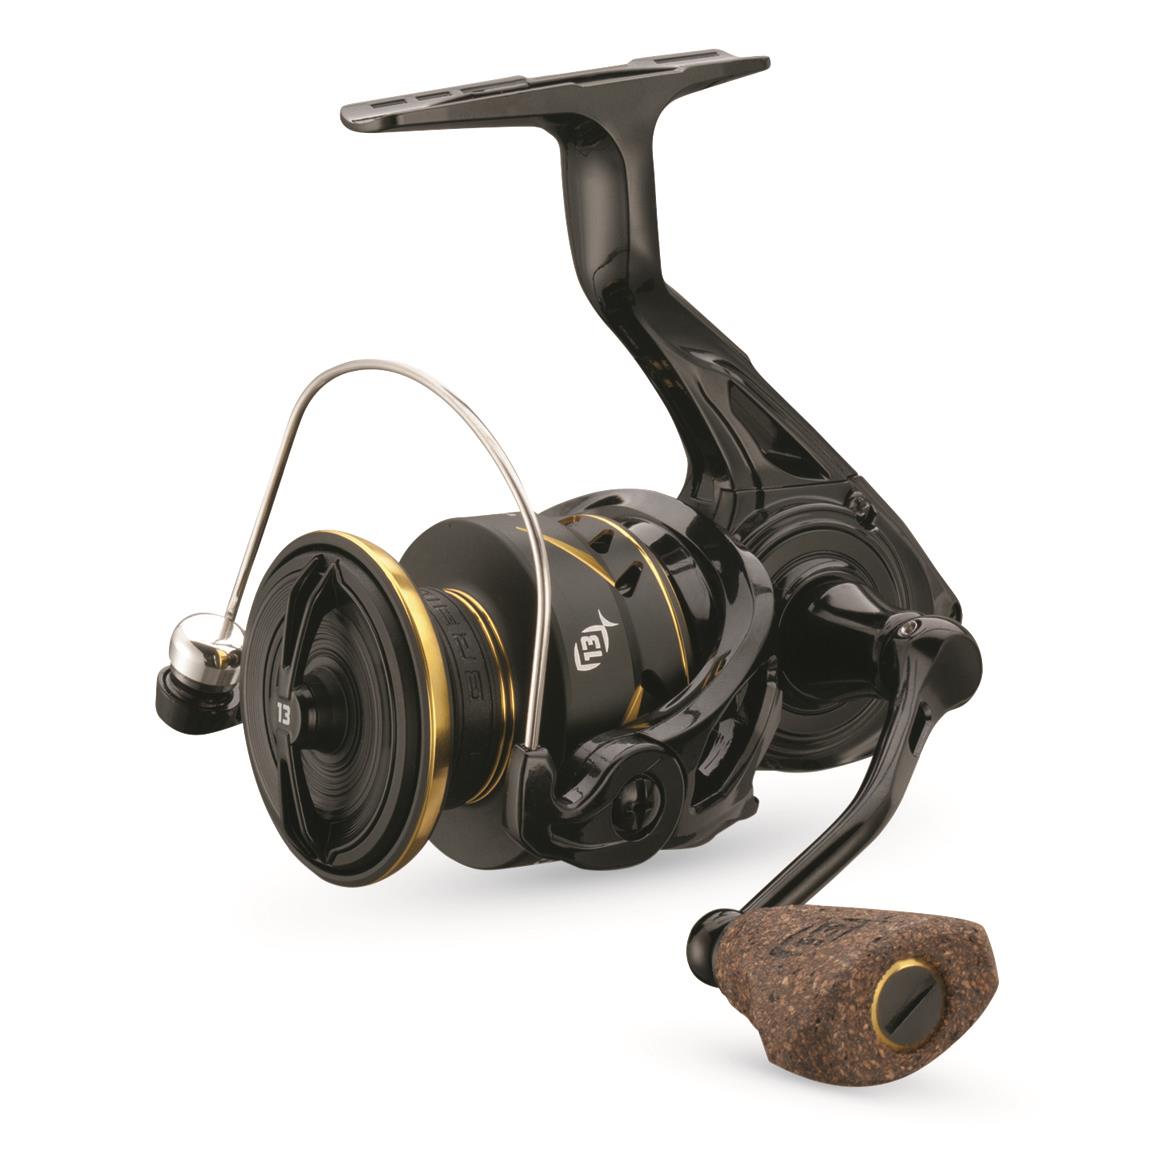 Ardent Fineese 500 Size Spinning Reel With 5.1:1 Gear Ratio